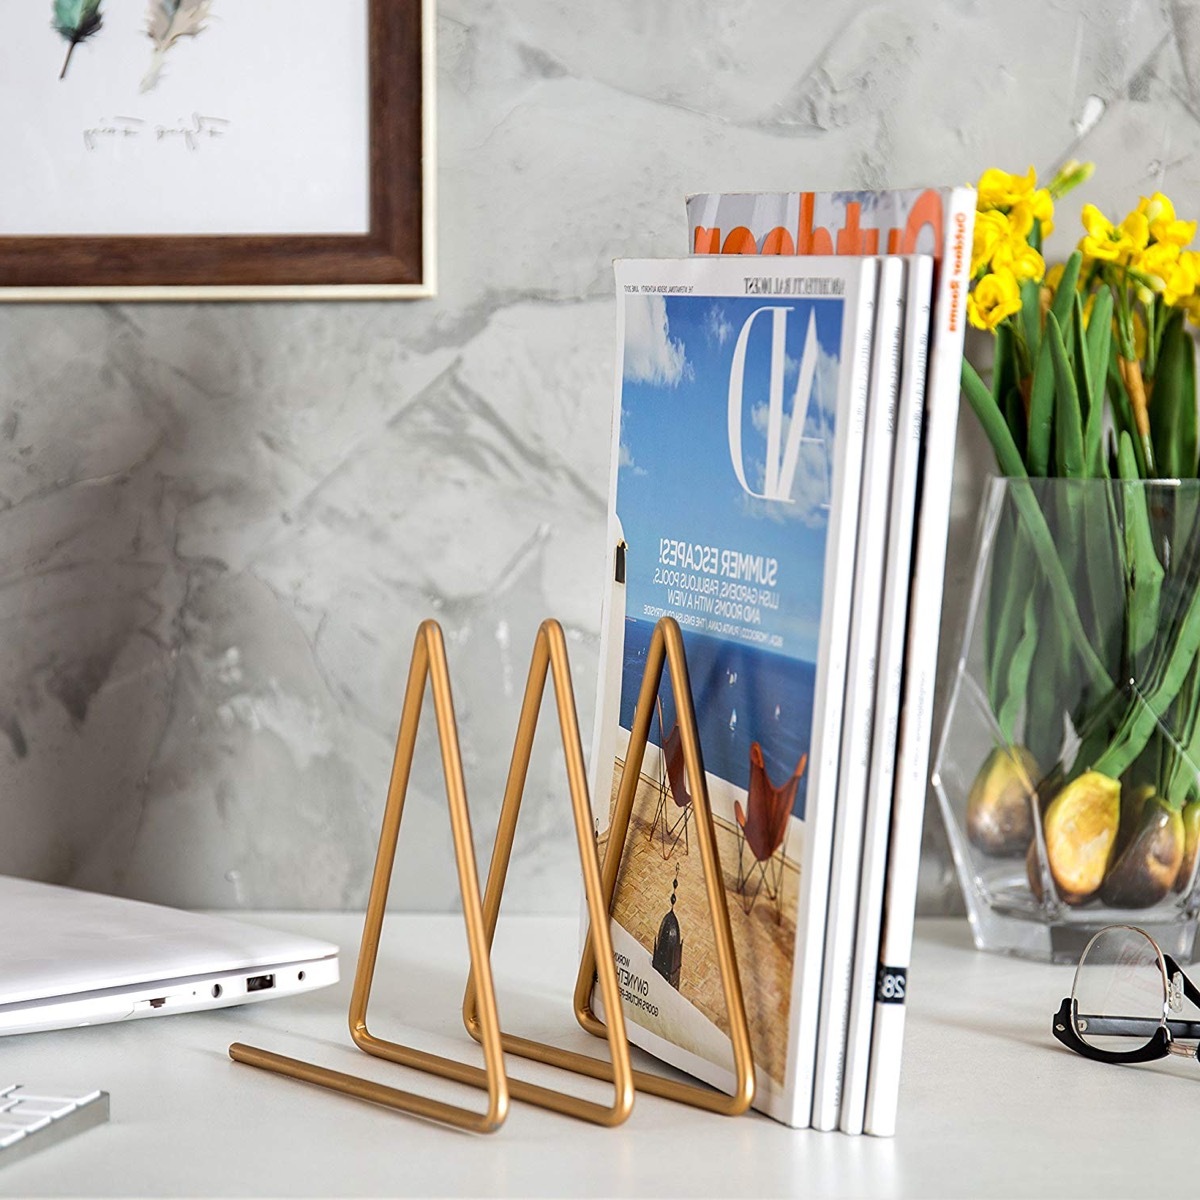 Stylish Magazine Rack: A Must-Have Organizer for Her